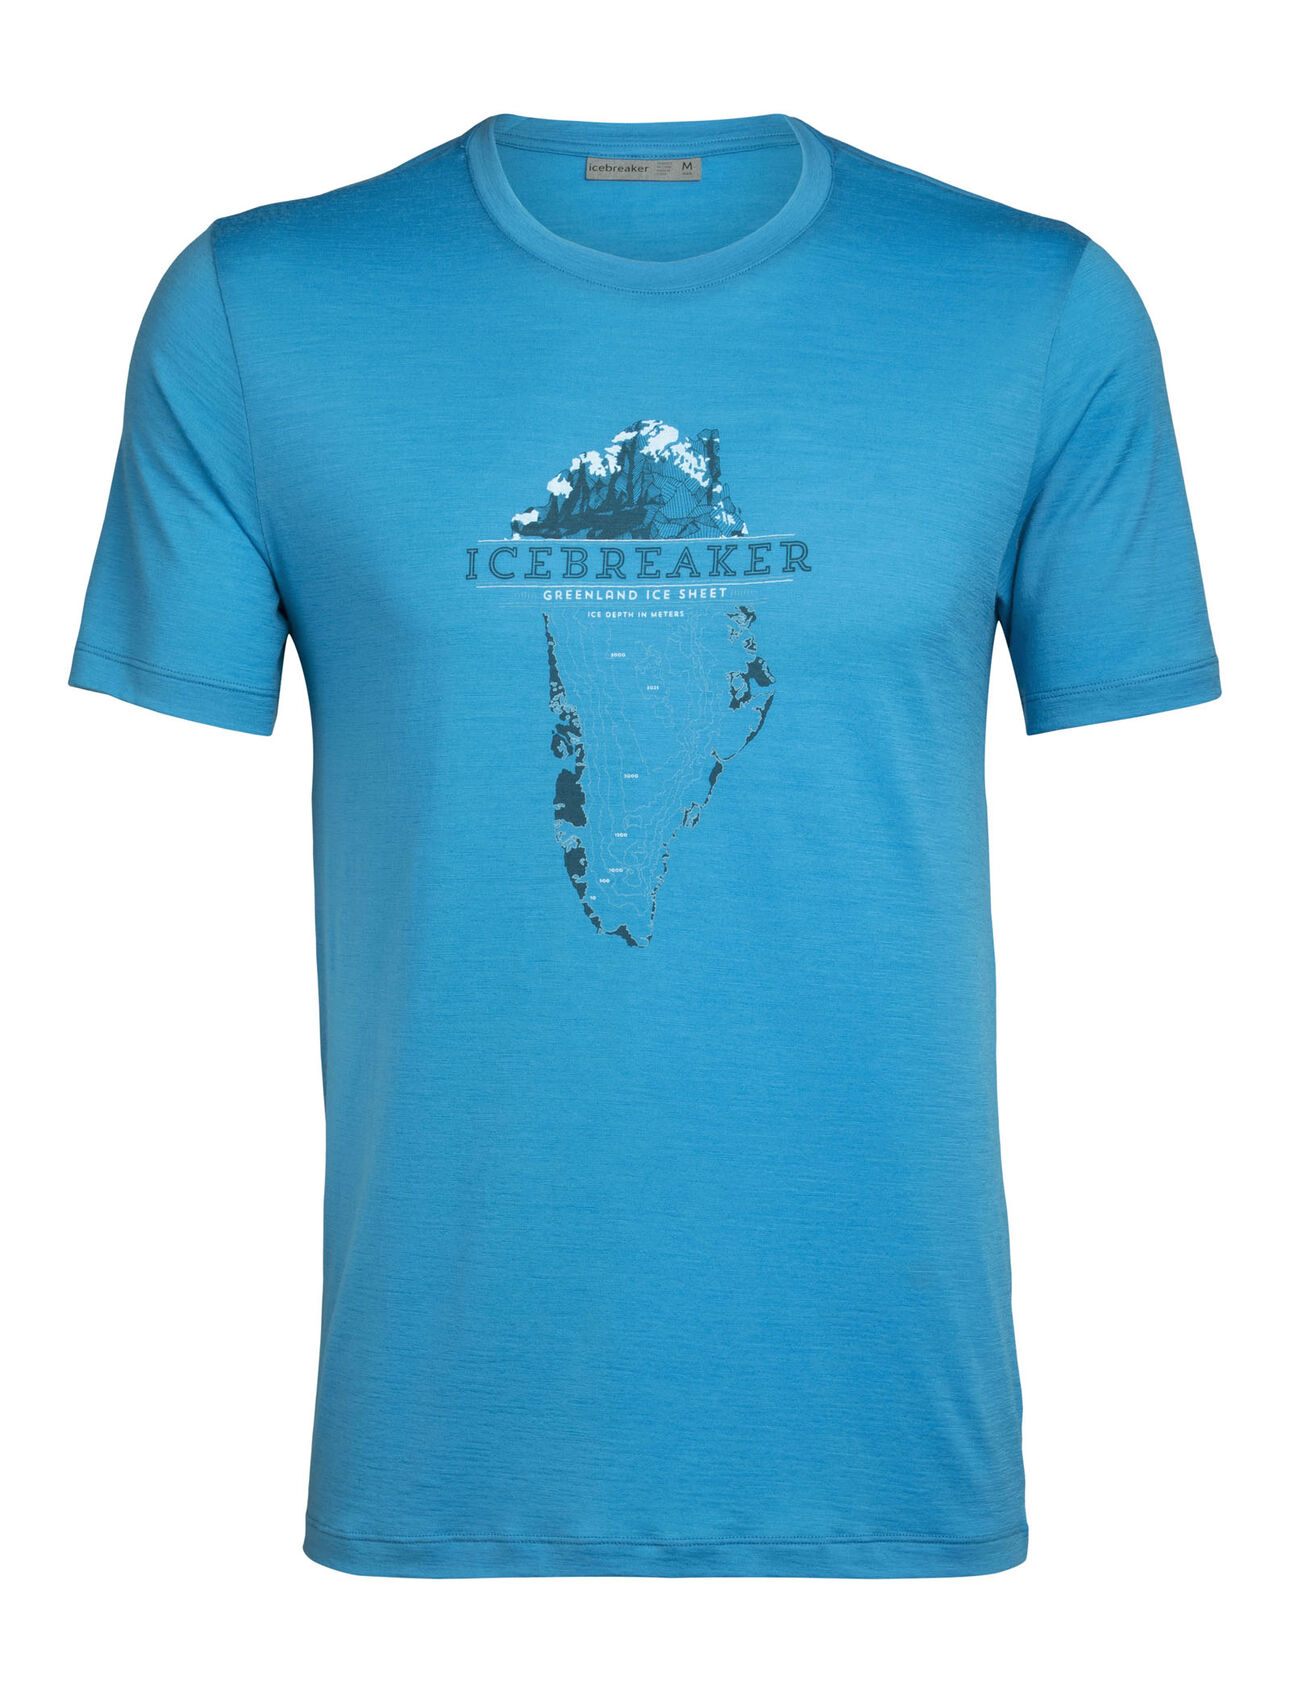 para hombre Merino Tech Lite Short Sleeve Crewe T-Shirt Greenland Crest Our most versatile tech tee, in breathable, odor-resistant merino wool with a slight stretch. Artist Scott Elser captures the depth of Greenland’s ice sheet, which covers 80% of Greenland and accounts for 8% of Earth’s fresh water.  